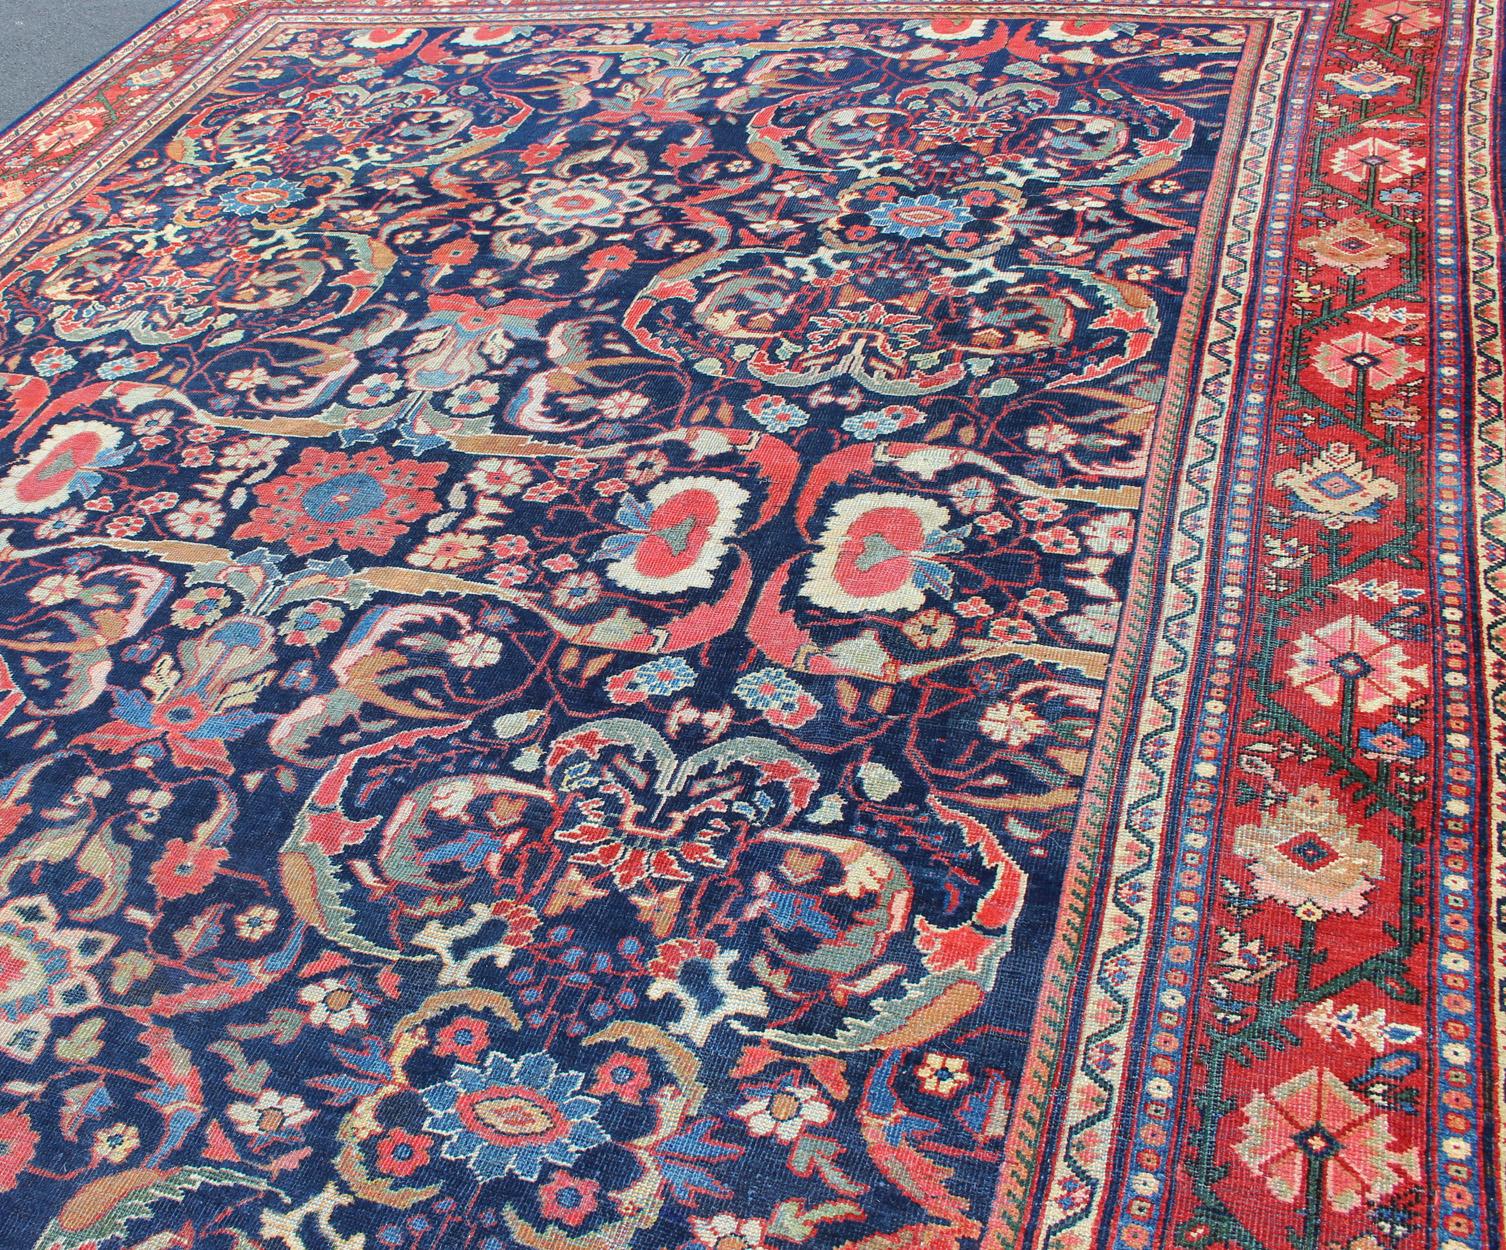 Colorful Antique Persian Sultanabad Rug with Navy Blue Field and Red Border In Good Condition For Sale In Atlanta, GA